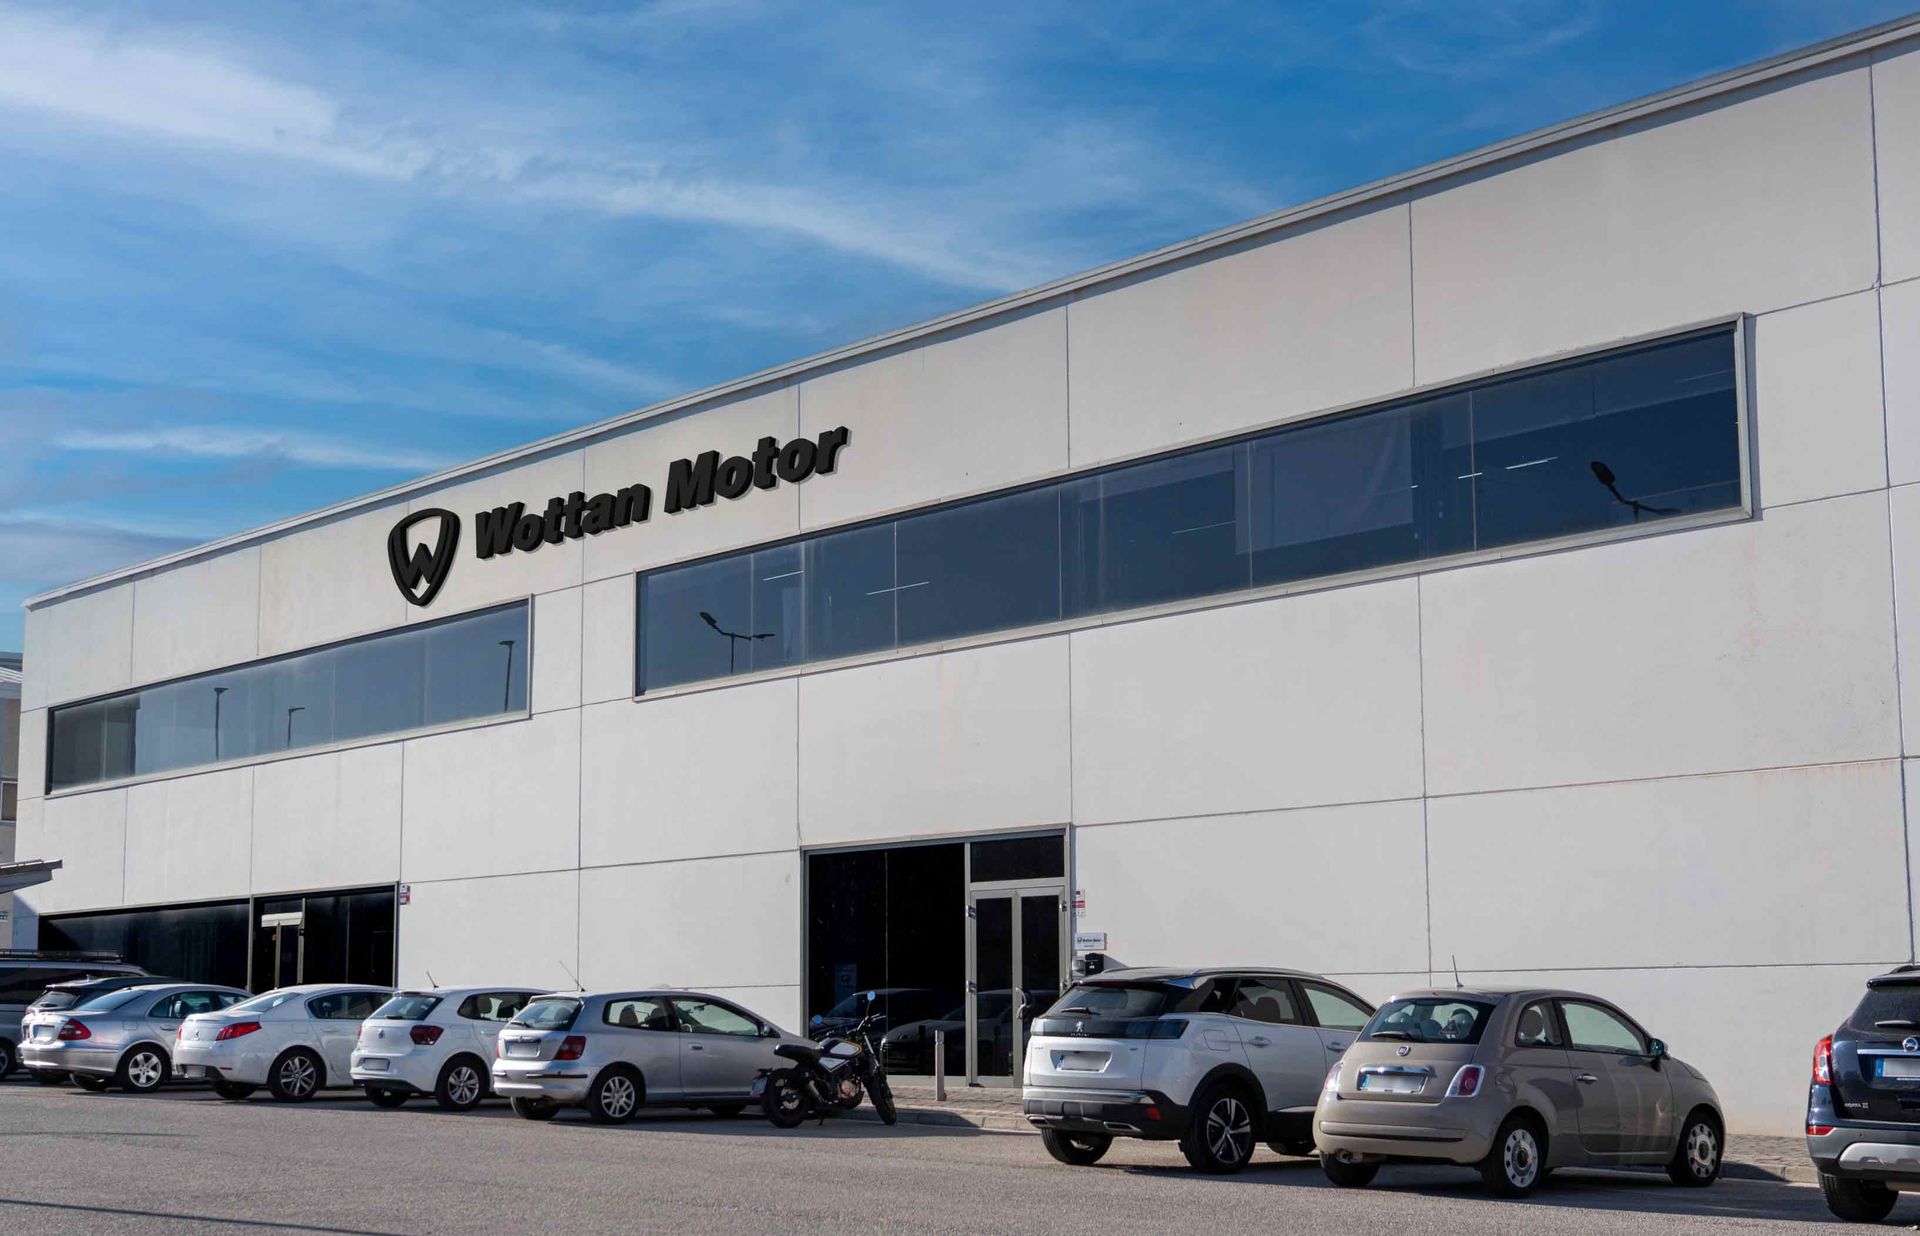 [Wottan Motor Rotova Headquarters] - Modern and functional, it reflects the image of an innovative company.